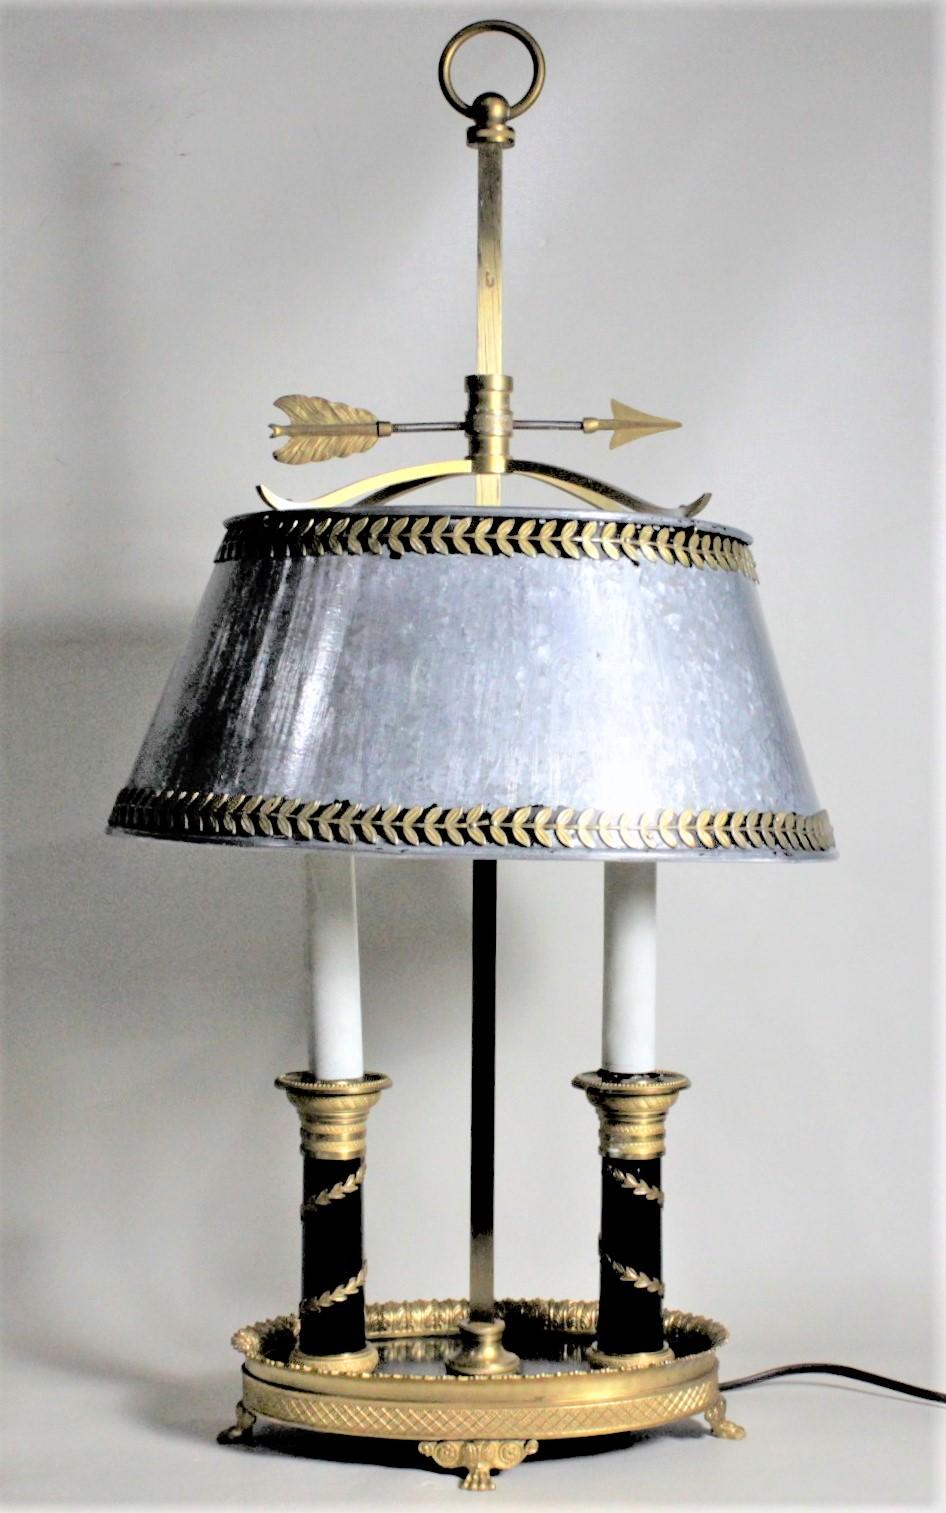 This antique styled toleware table lamp is unsigned, but presumed to have been made in France in circa 1960. The frame of the lamp and shade are cast of solid brass and the painted adjustable shade is cold-painted metal. The cast brass ring finial